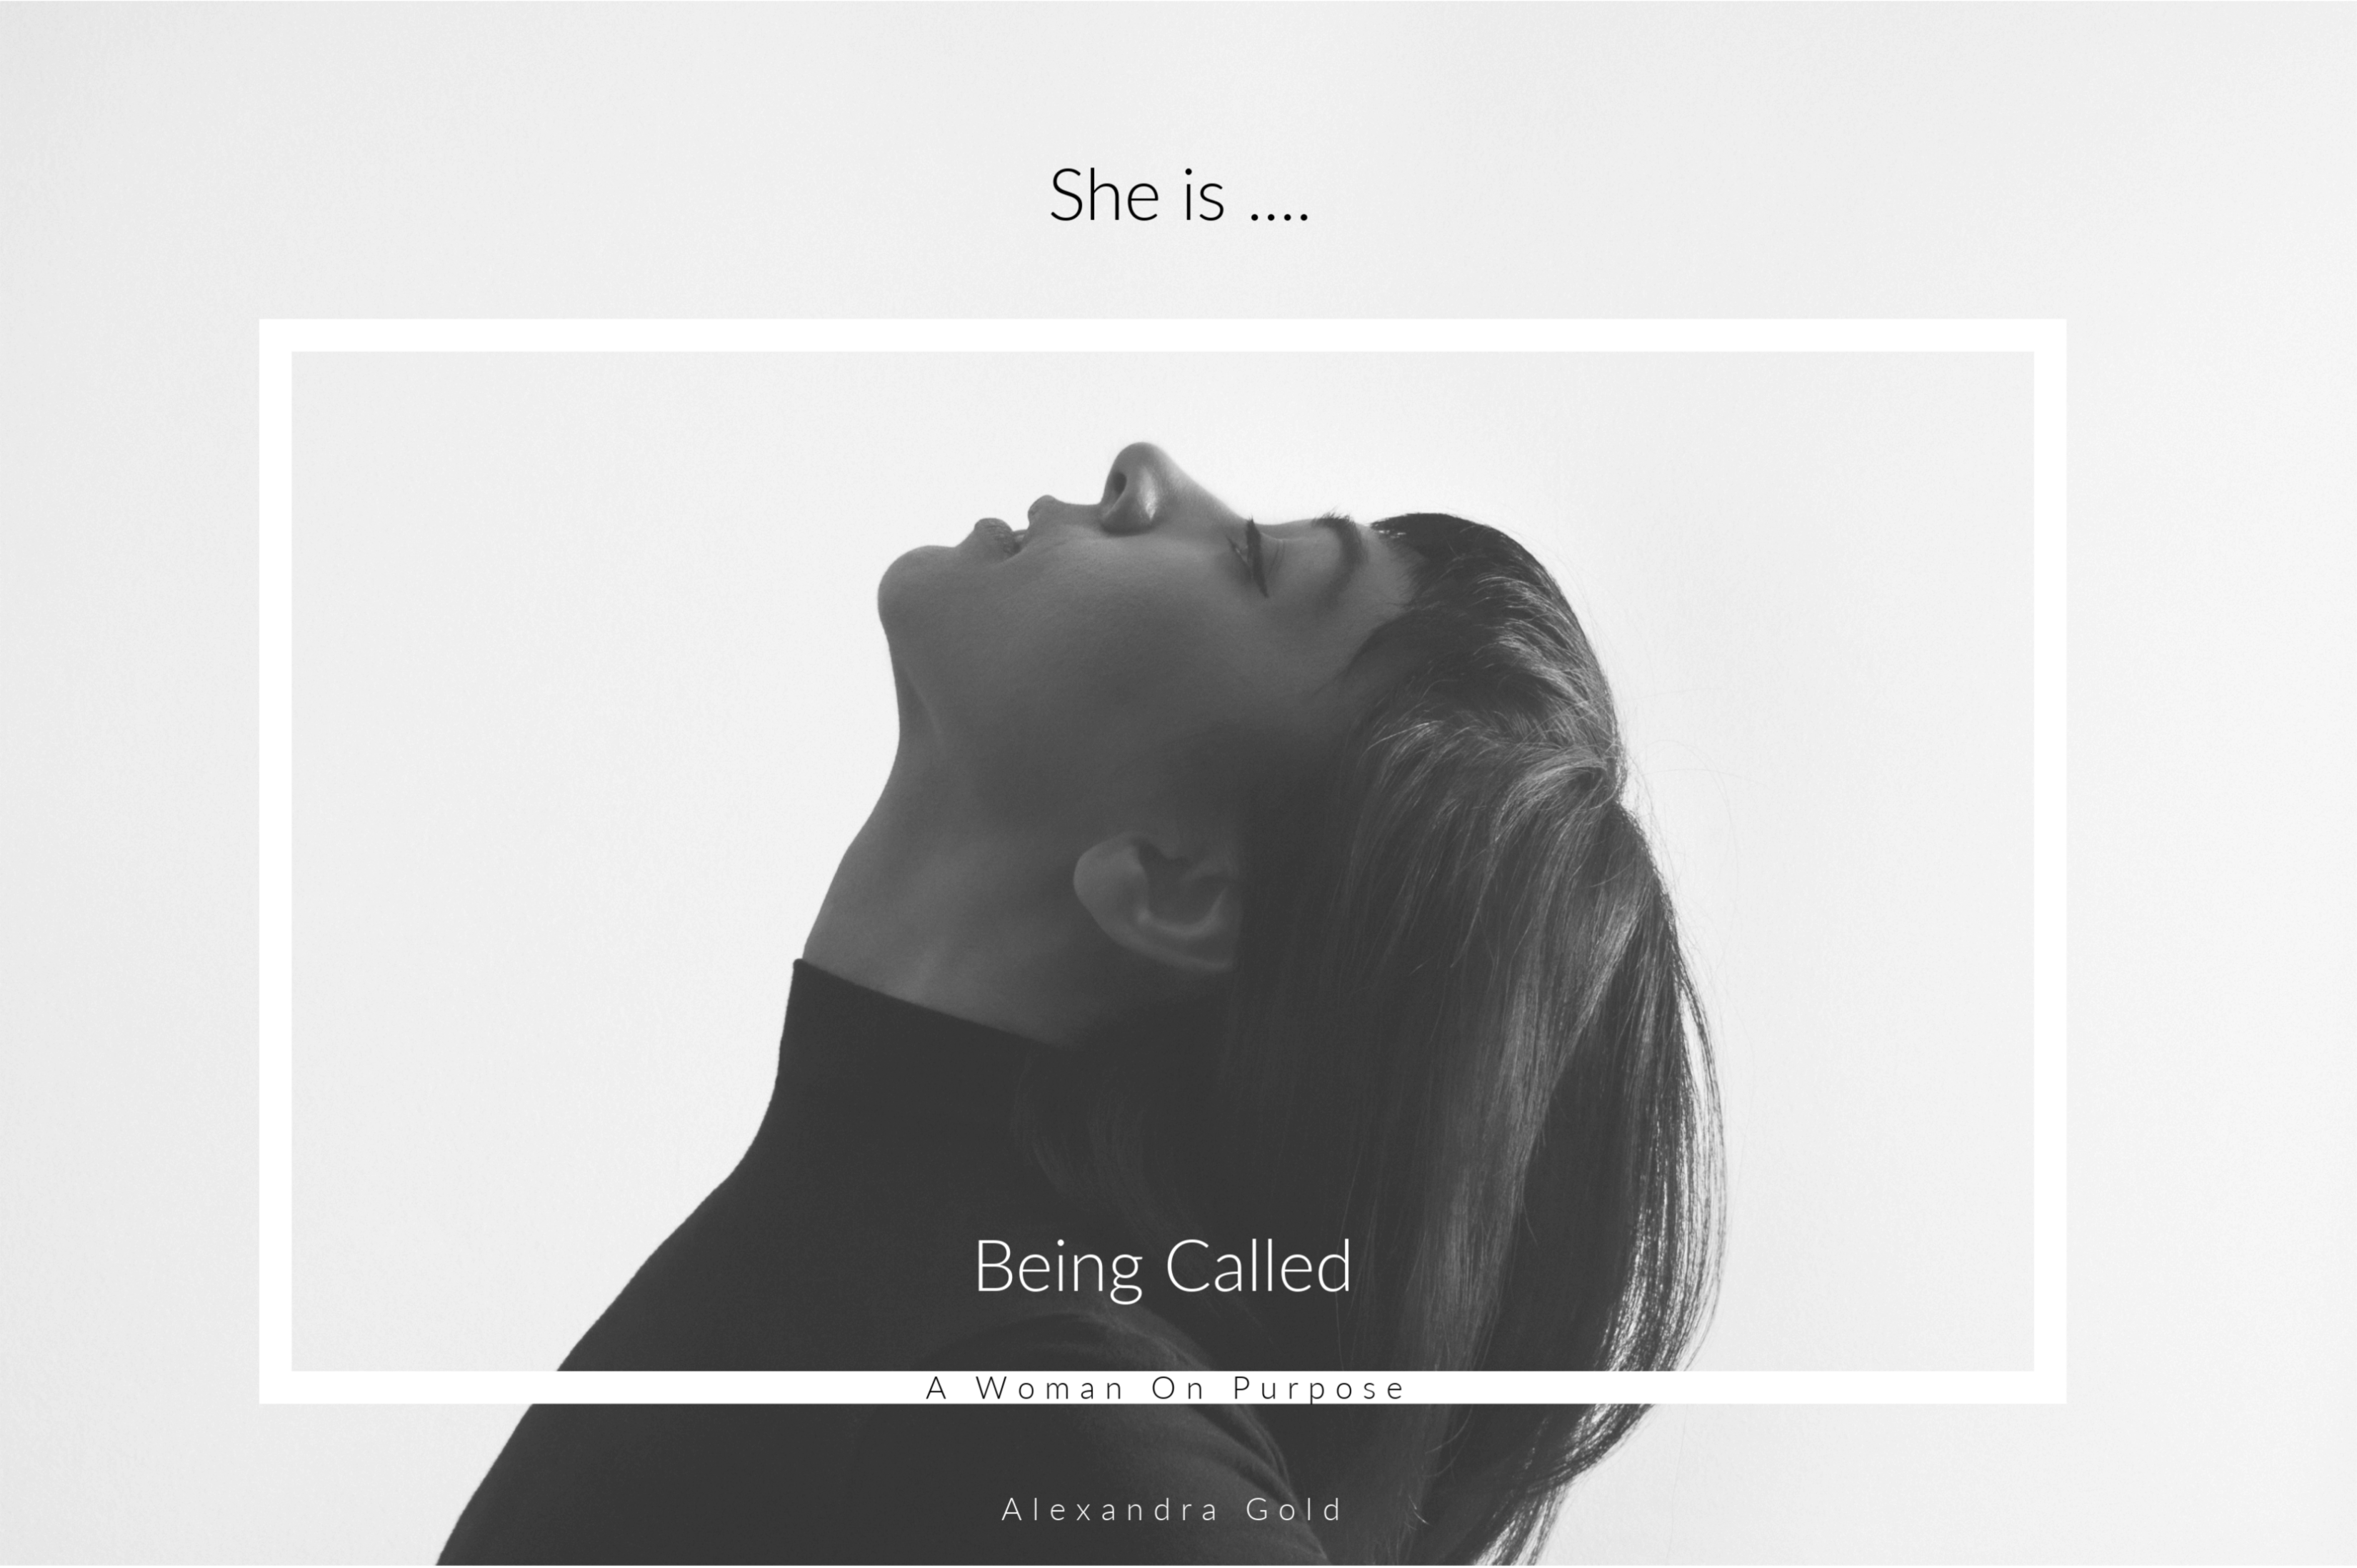 She is being called - What is Purpose?